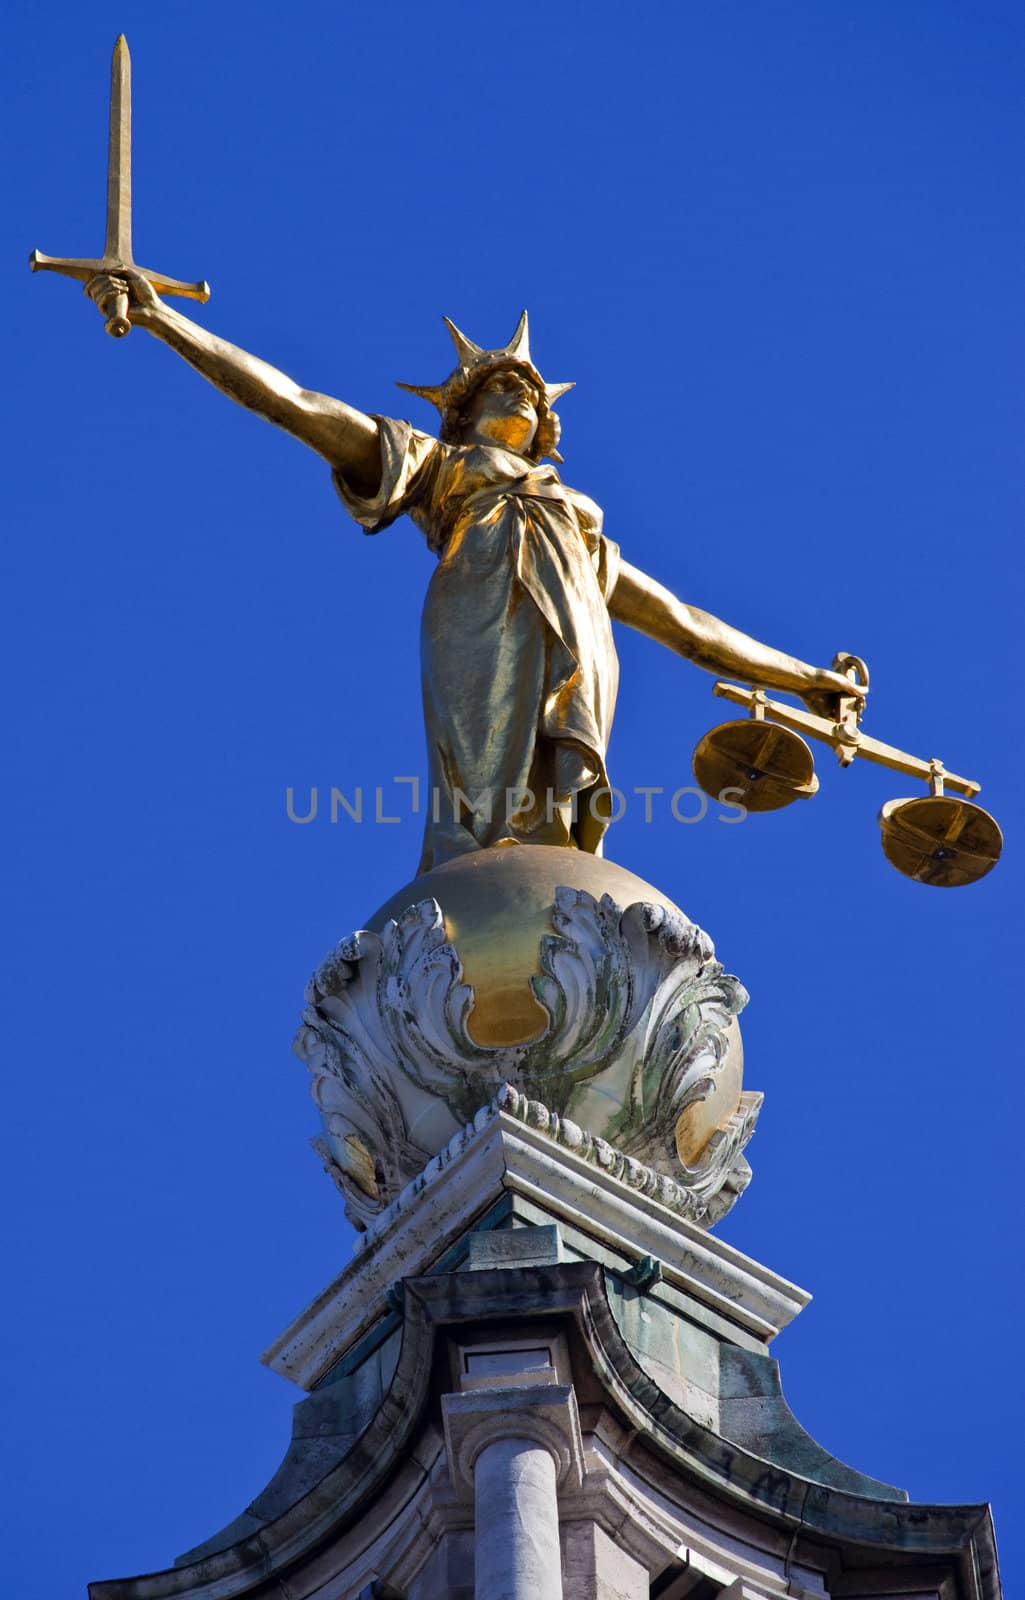 Lady Justice Statue ontop of the Old Bailey in London by chrisdorney